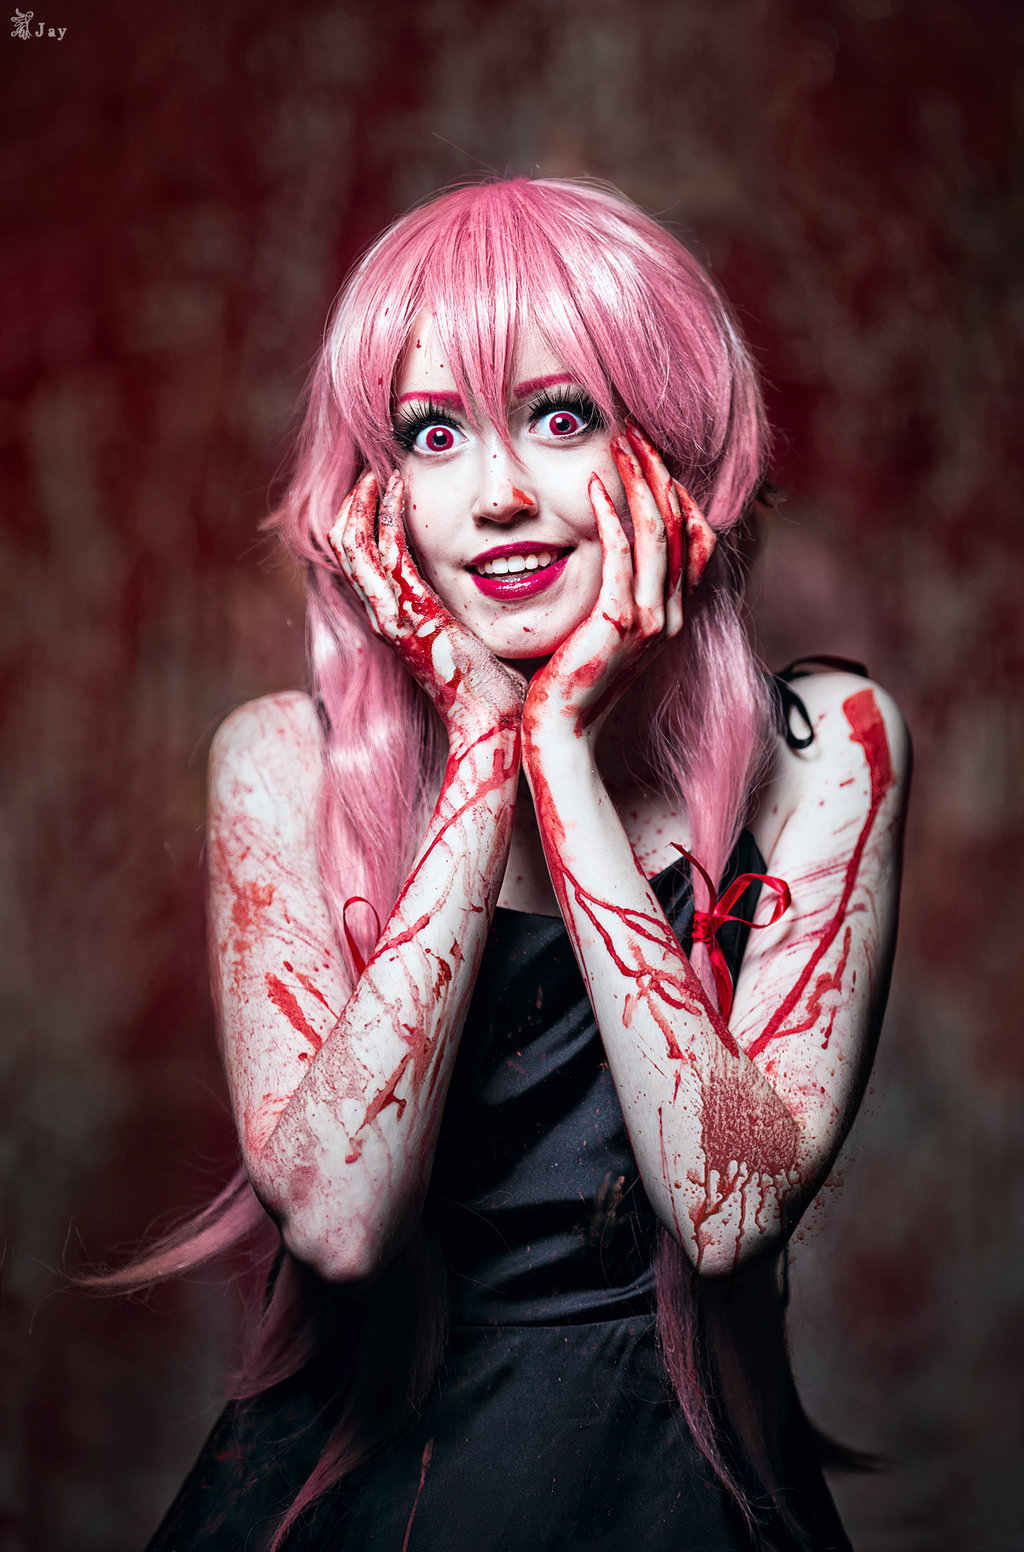 This Is Eva As A Very Crazy Yuno From Future Diary.